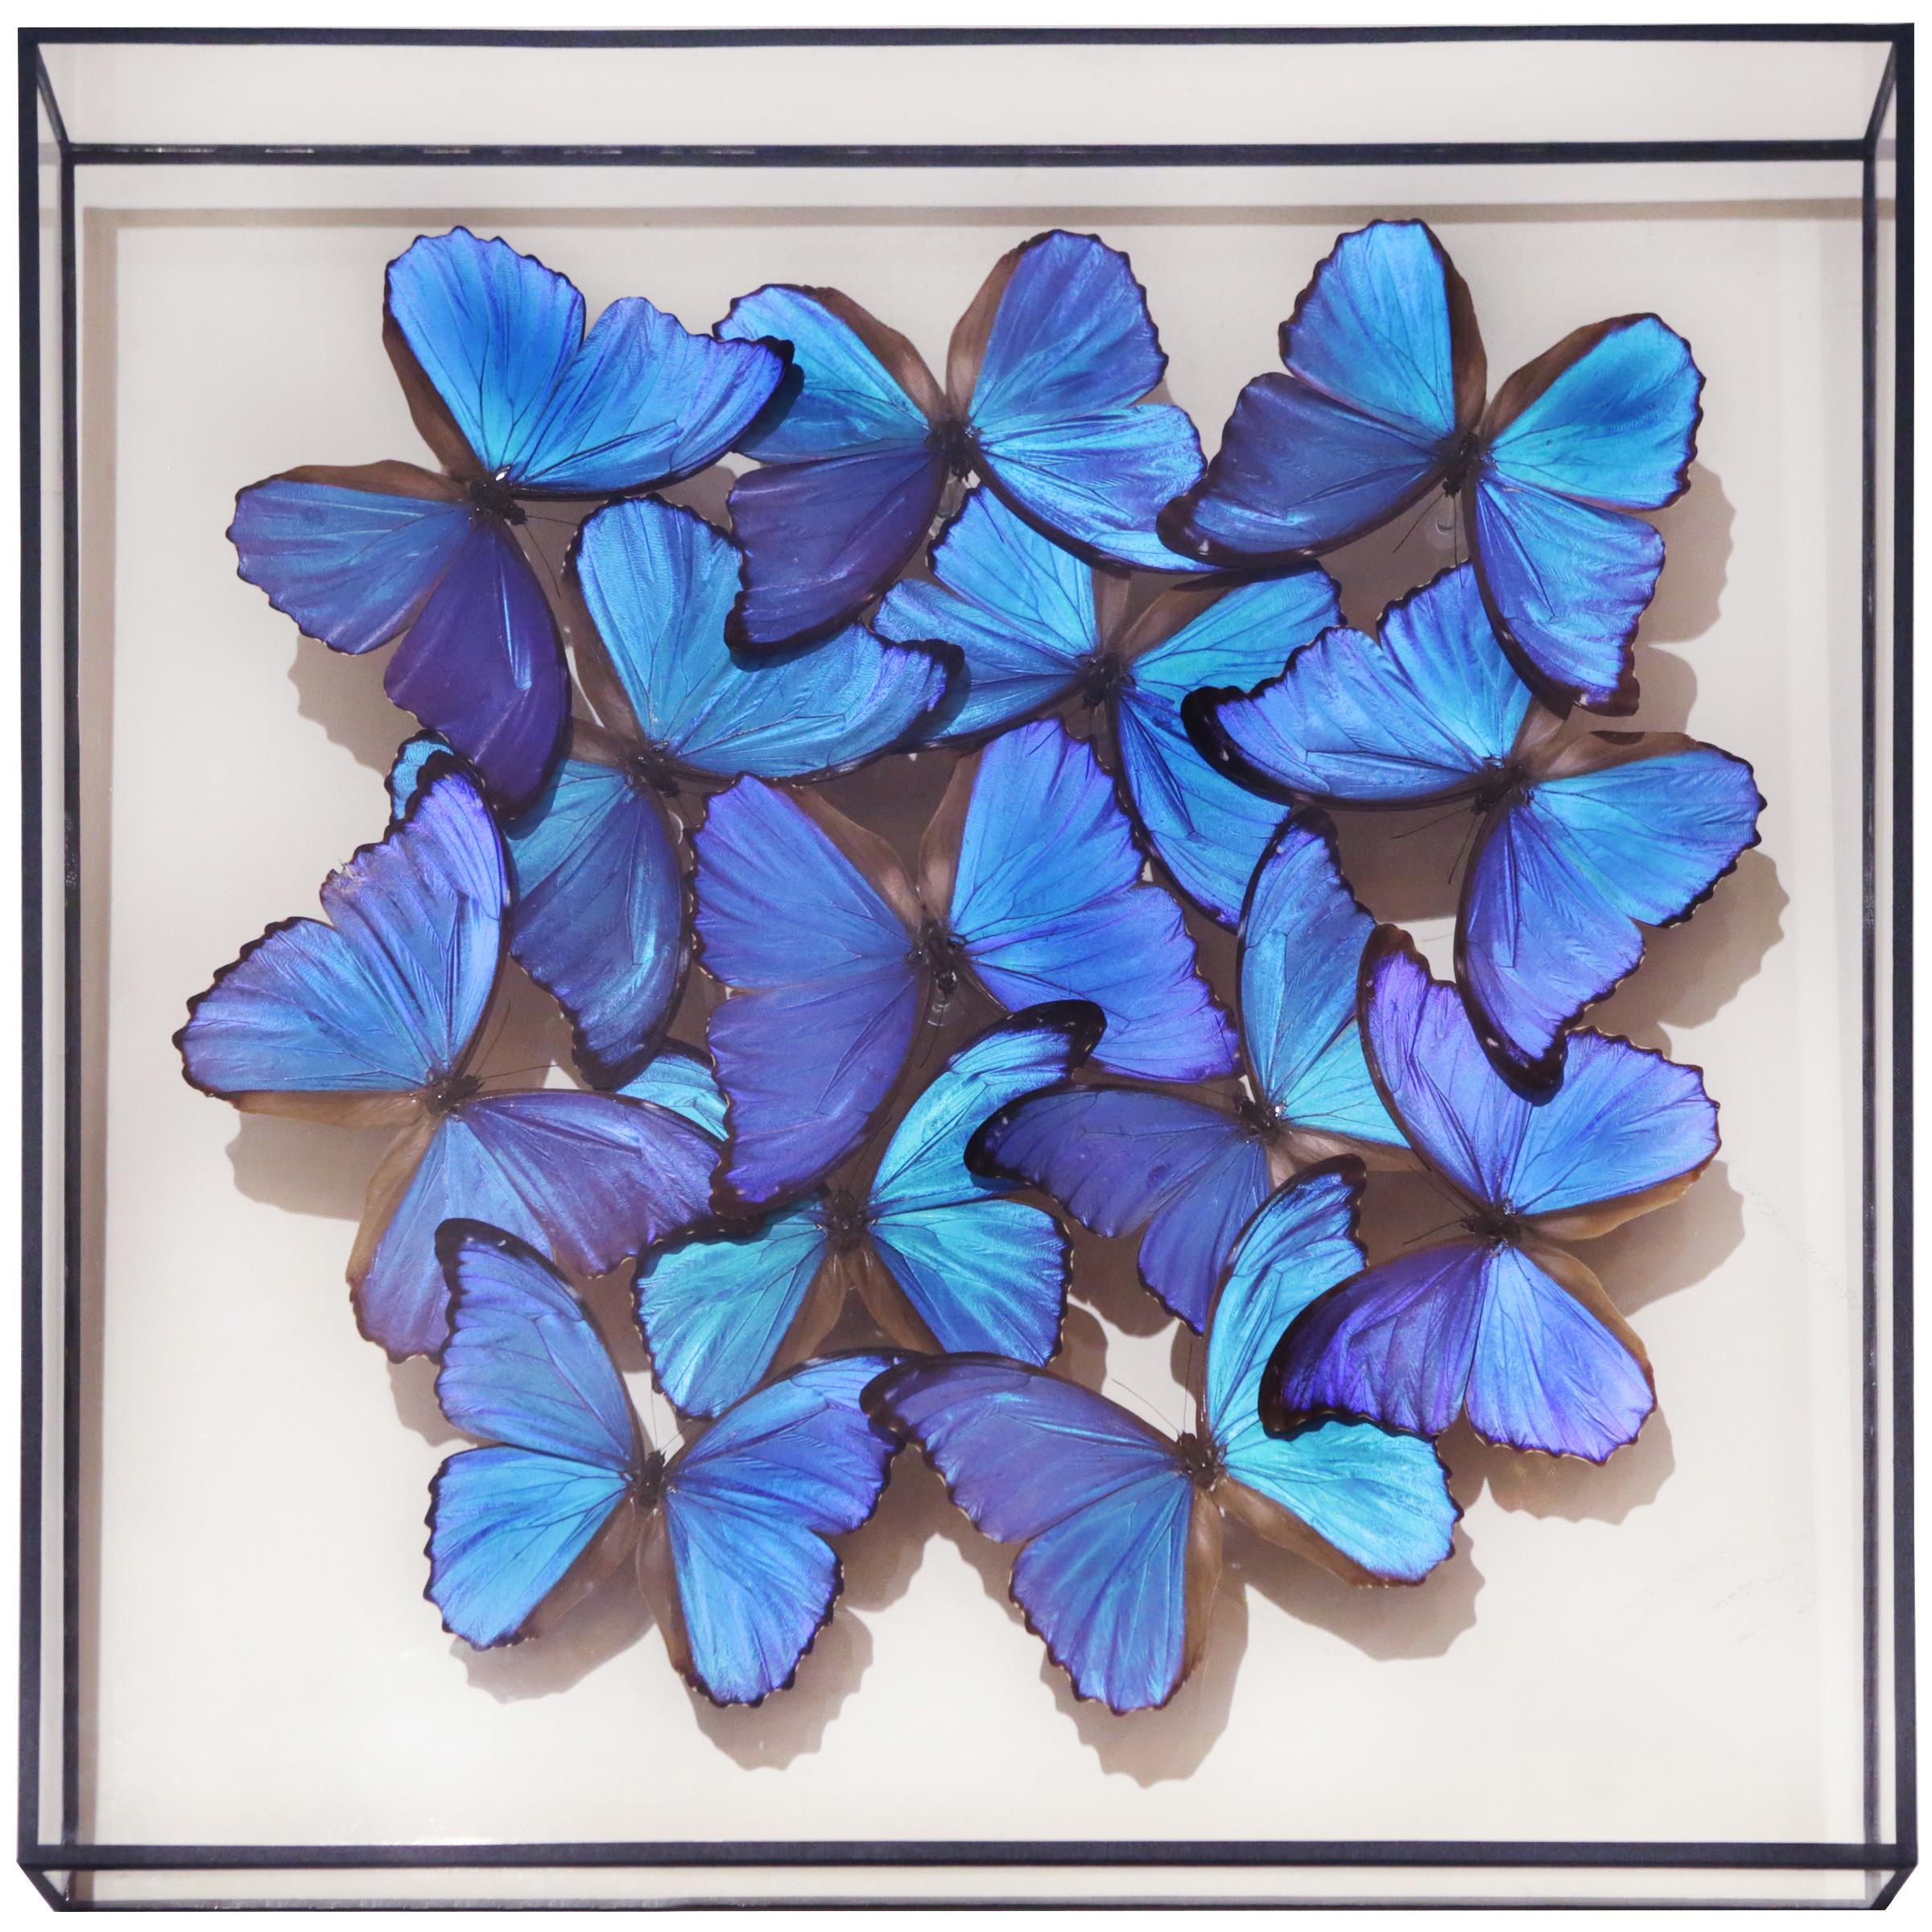 Frame Morphos butterflies medium,
with natural Morphos butterflies from Peru,
under glass box frame.
Exceptional and unique piece made in France
in 2019.